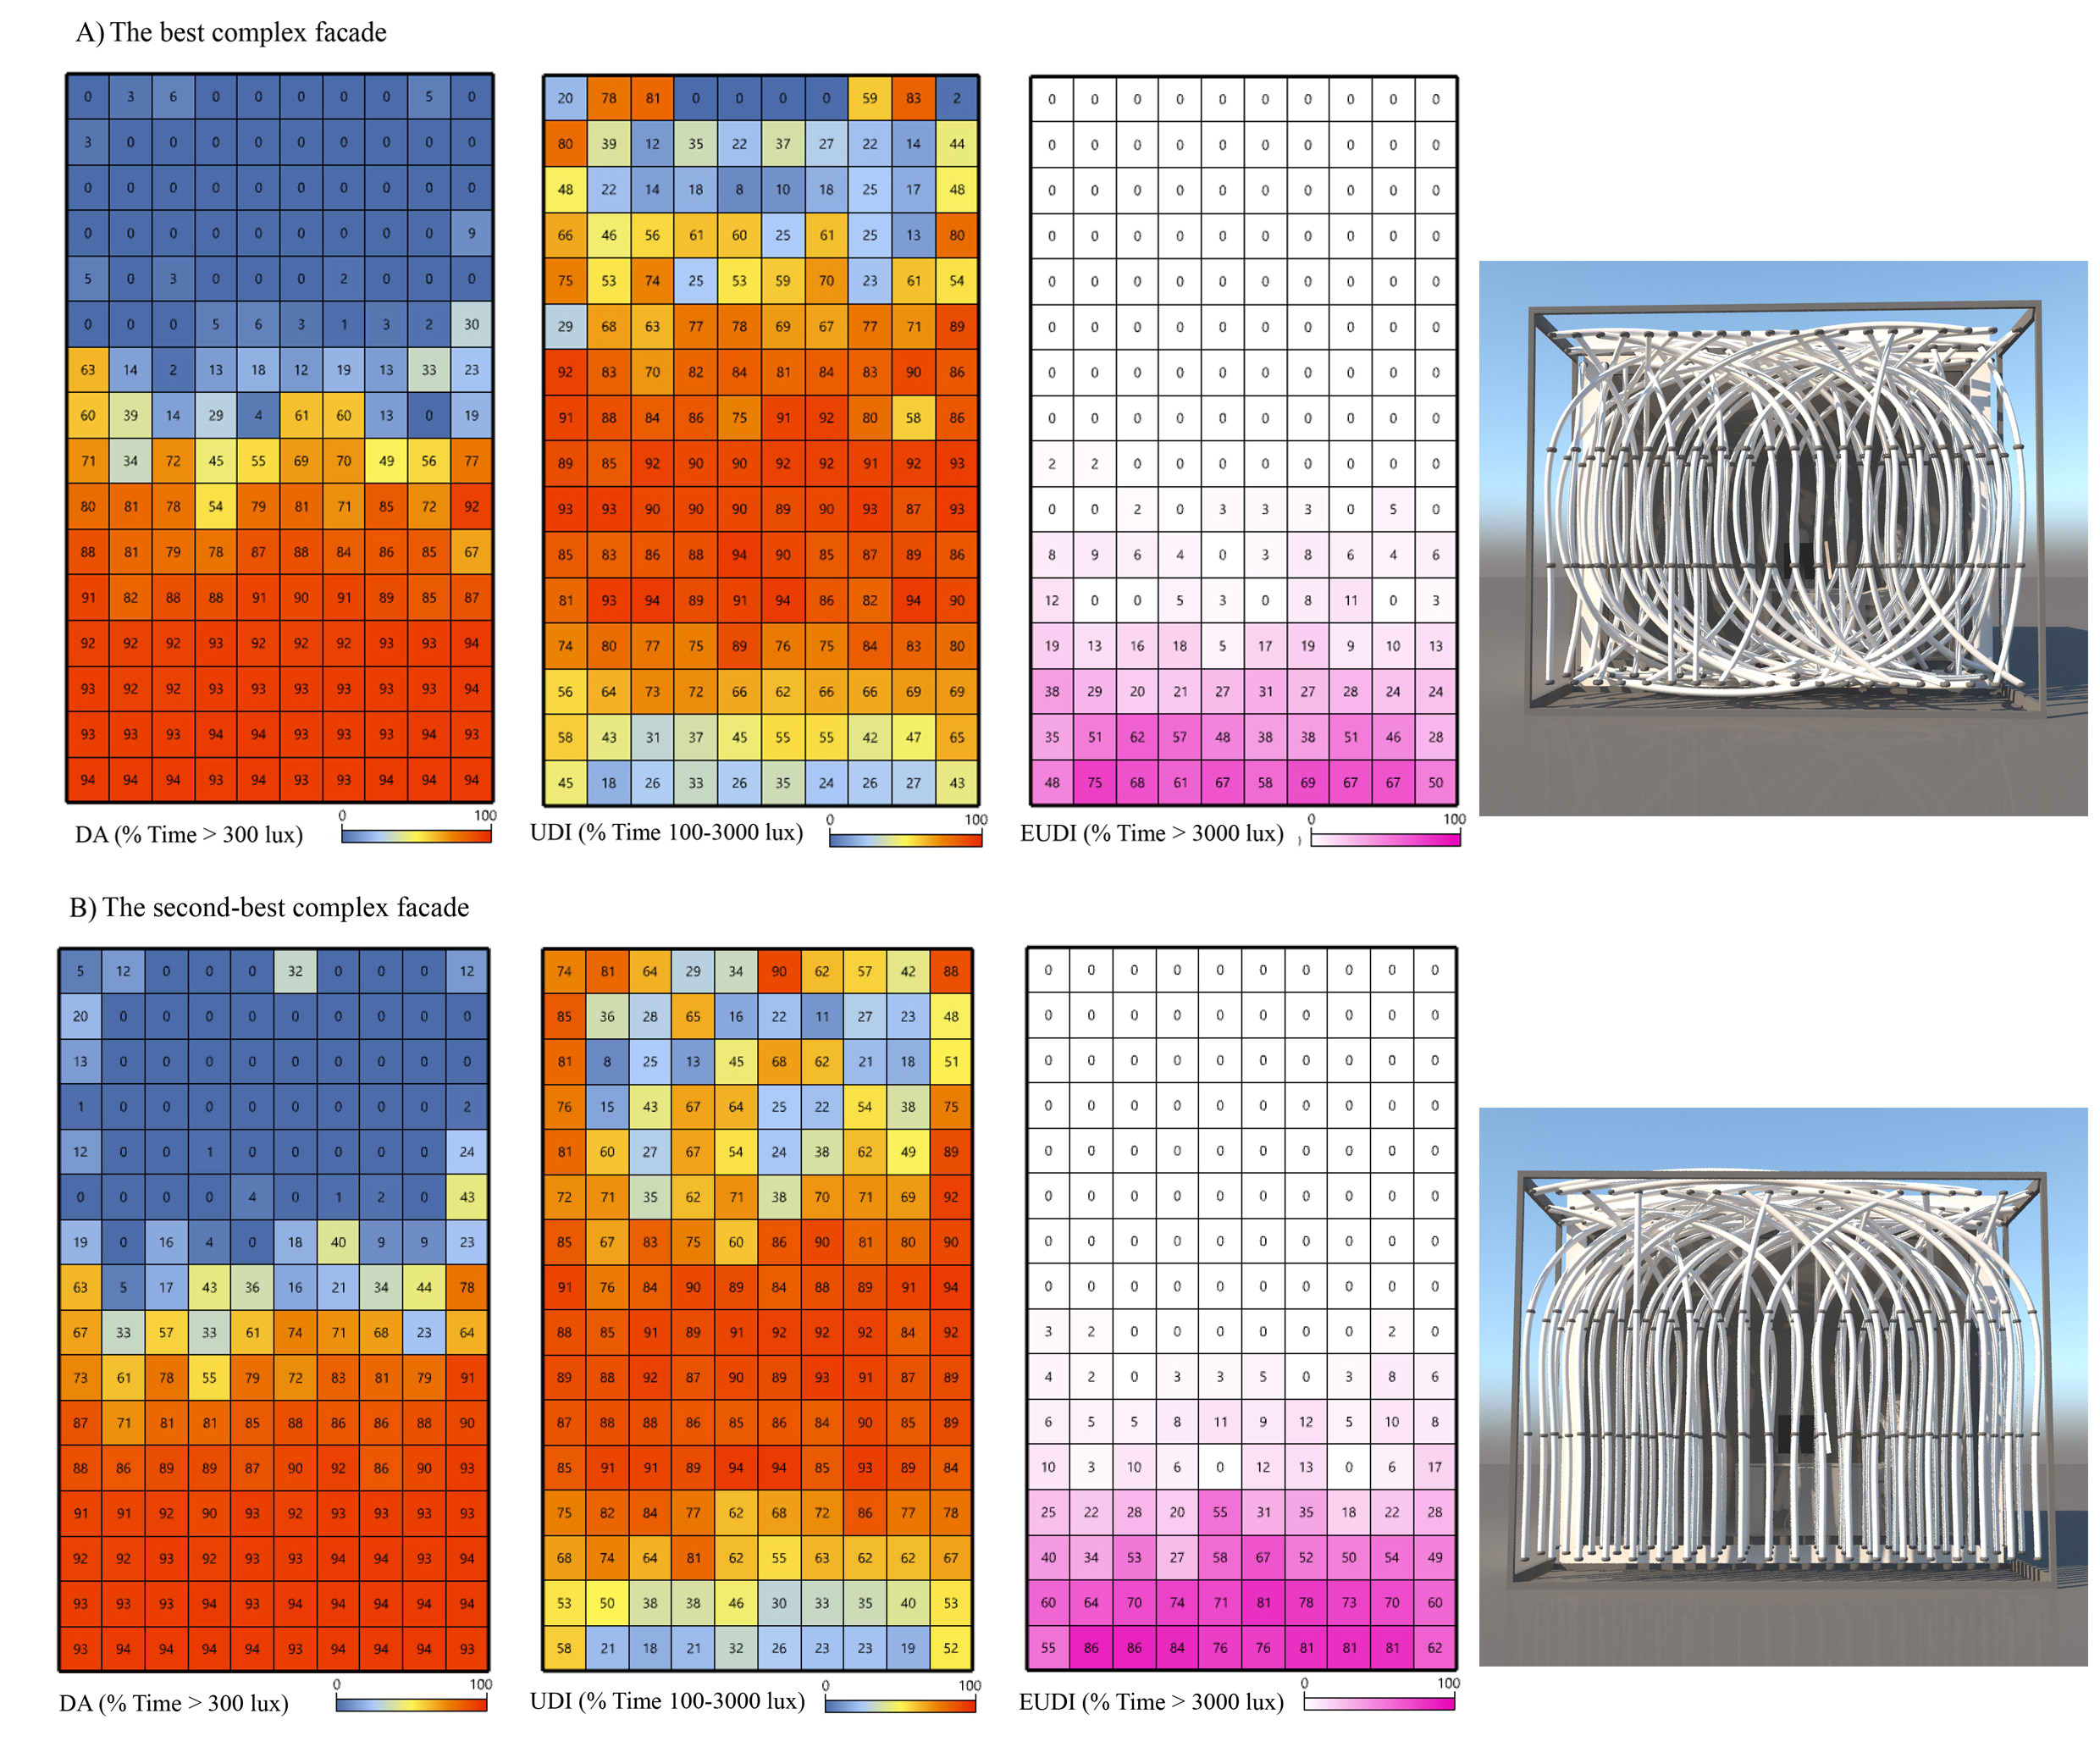 Annual climate-based daylight metrics evaluation of the complex façade forms: (a) The best complex facade (b) The second-best complex façade.